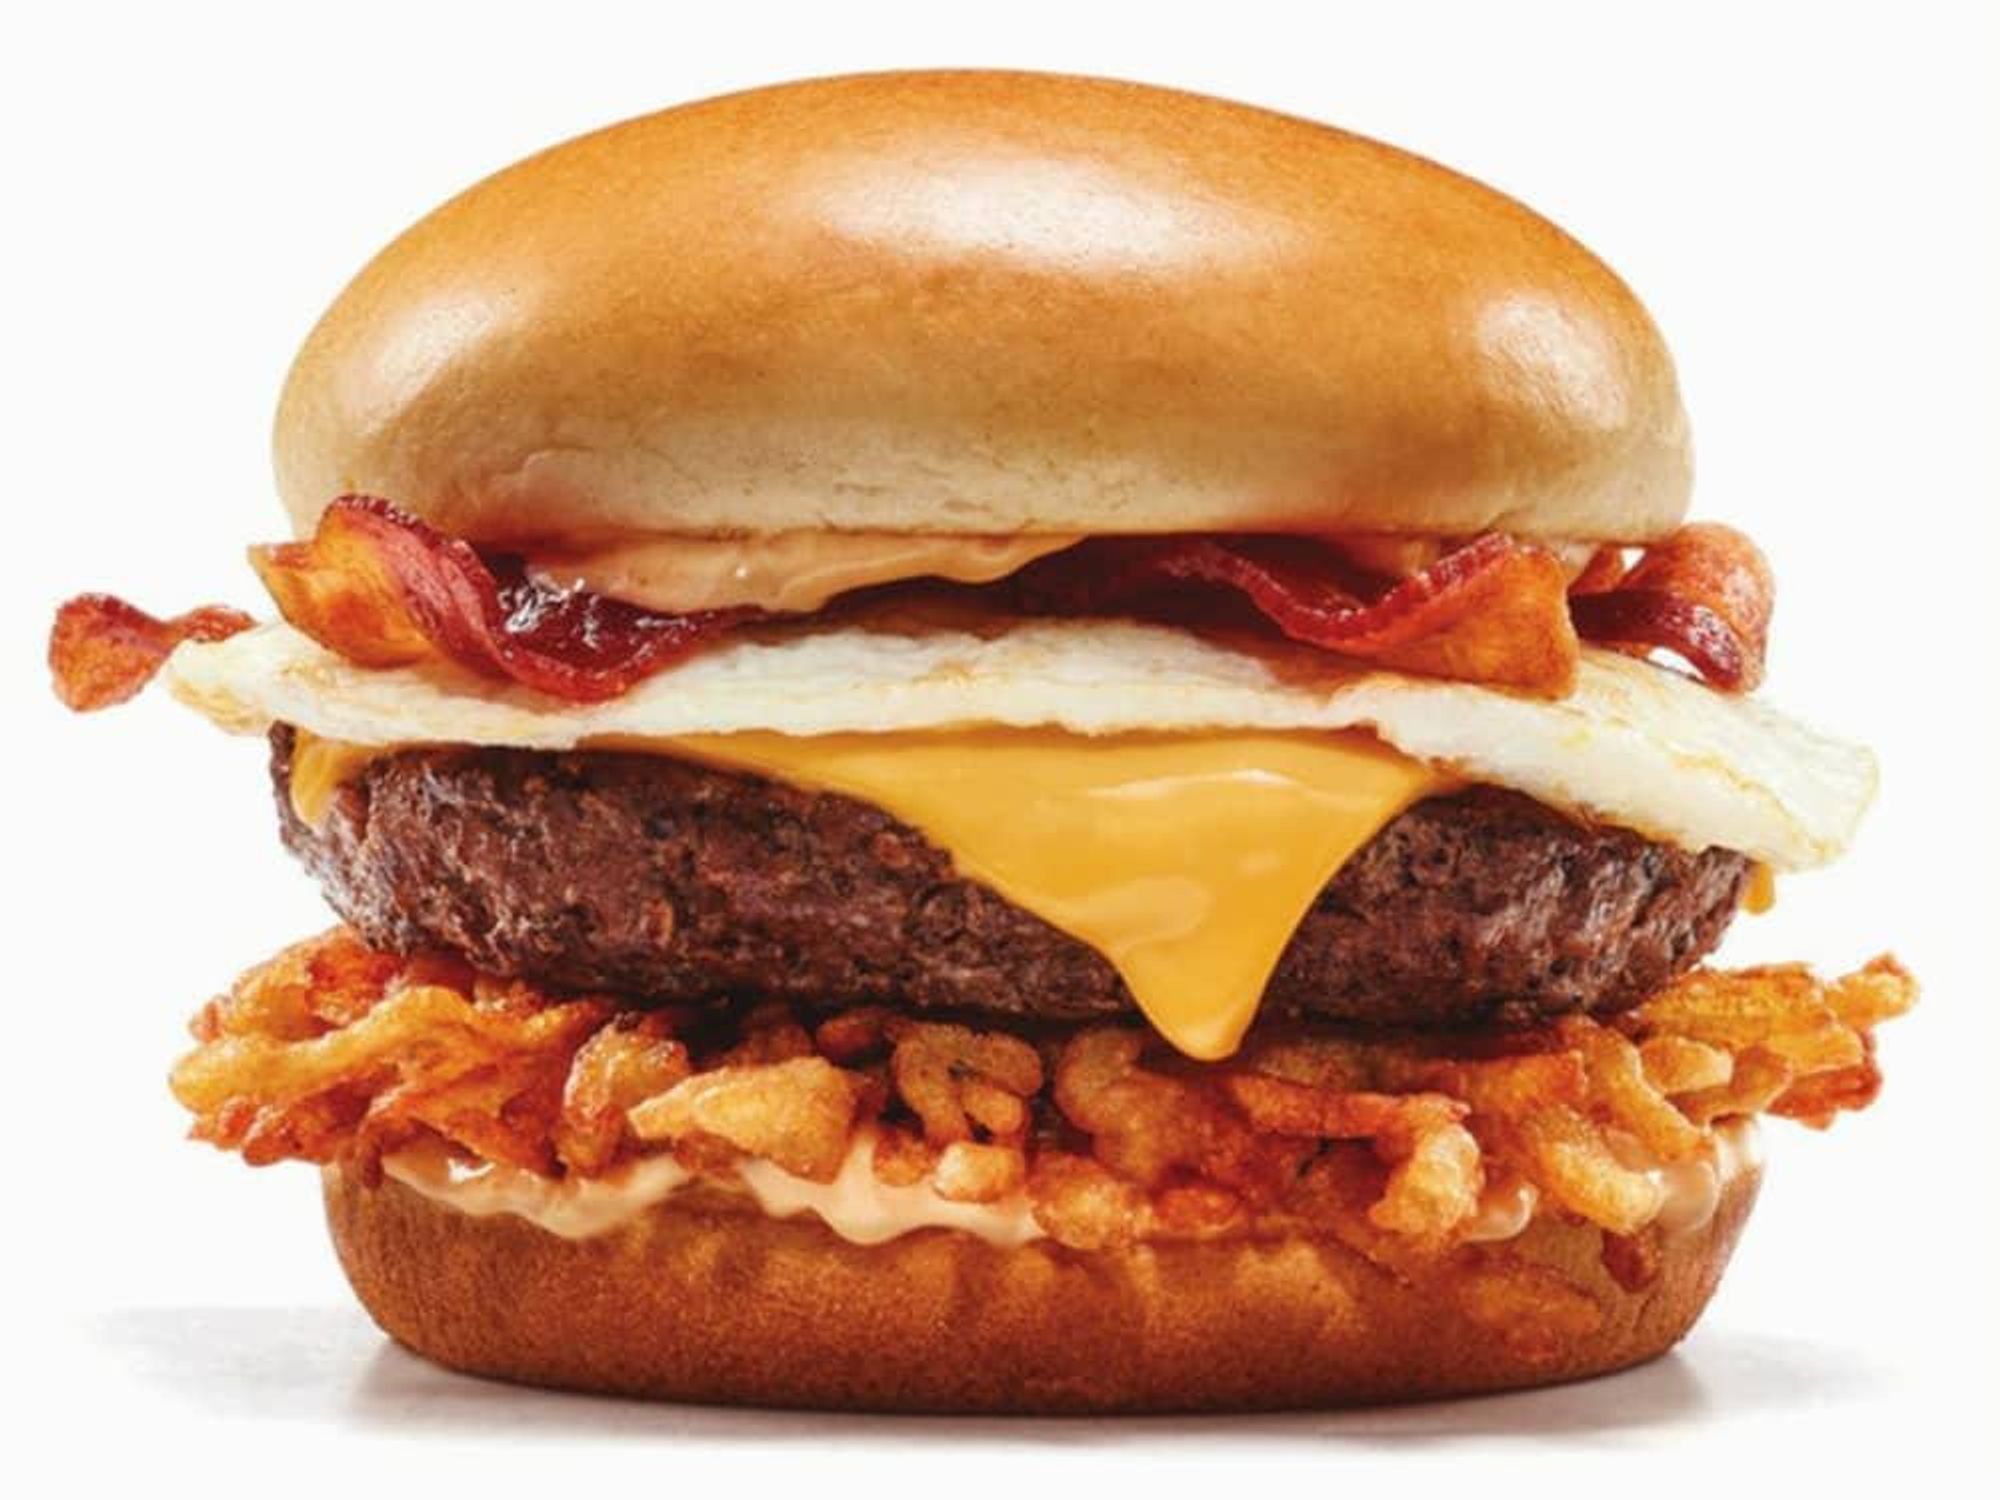 Restaurant formerly known as IHOP brings the brunch with new burger ...